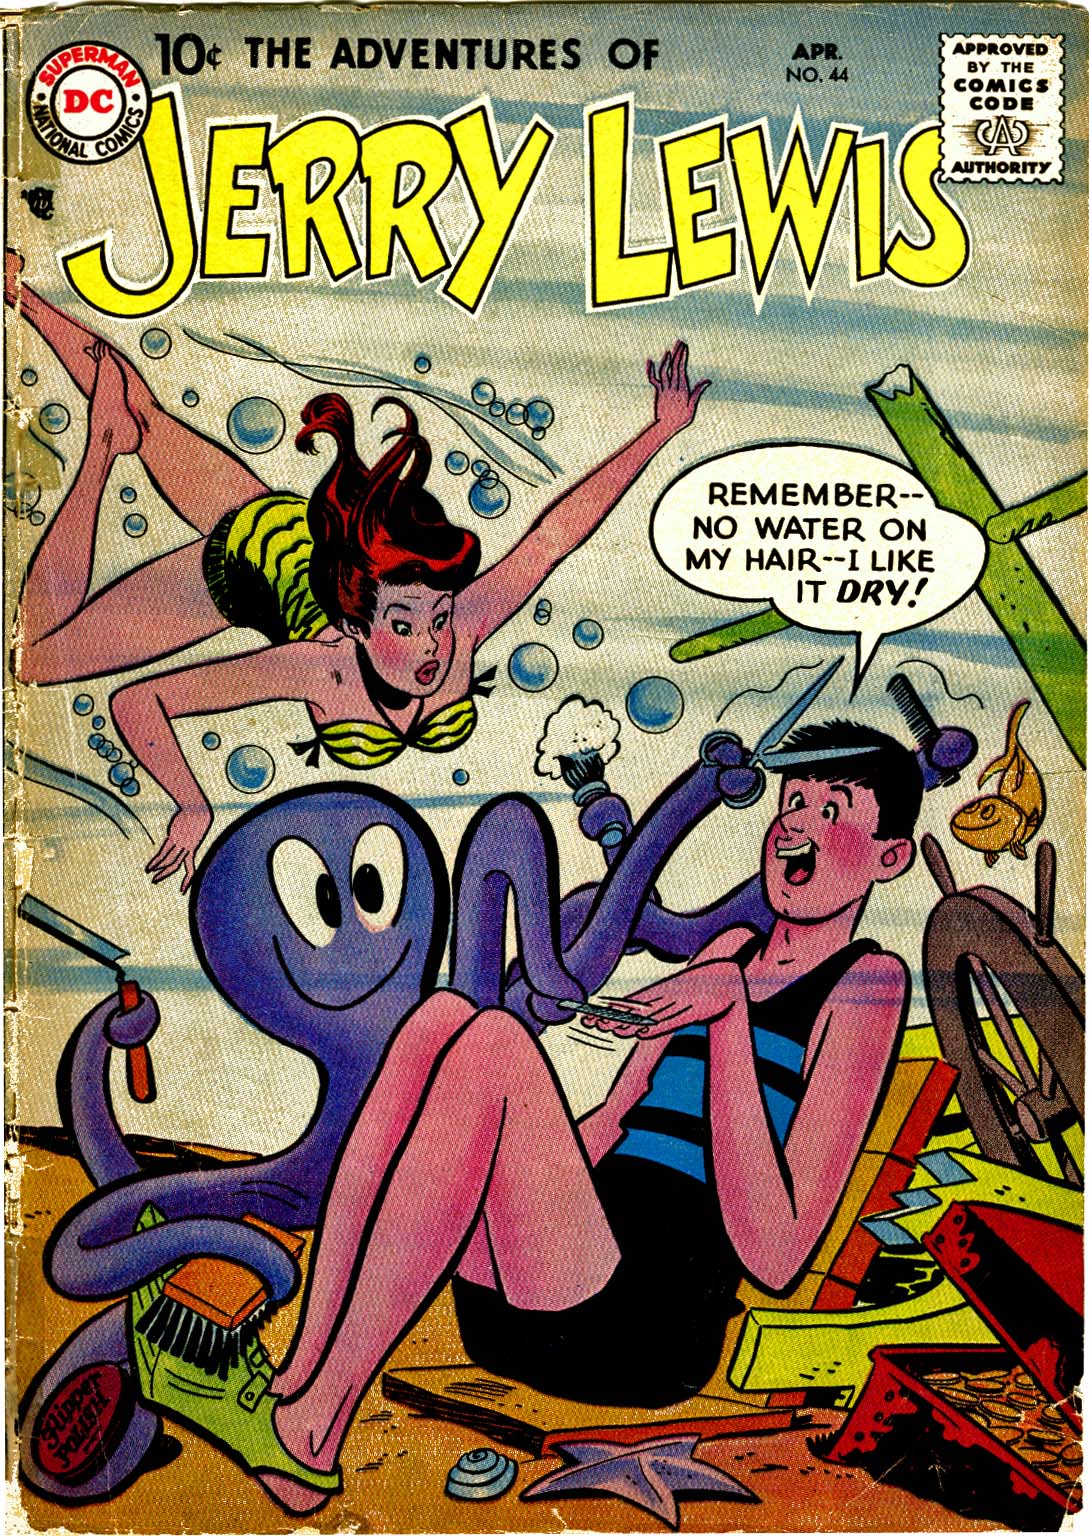 Read online The Adventures of Jerry Lewis comic -  Issue #44 - 1